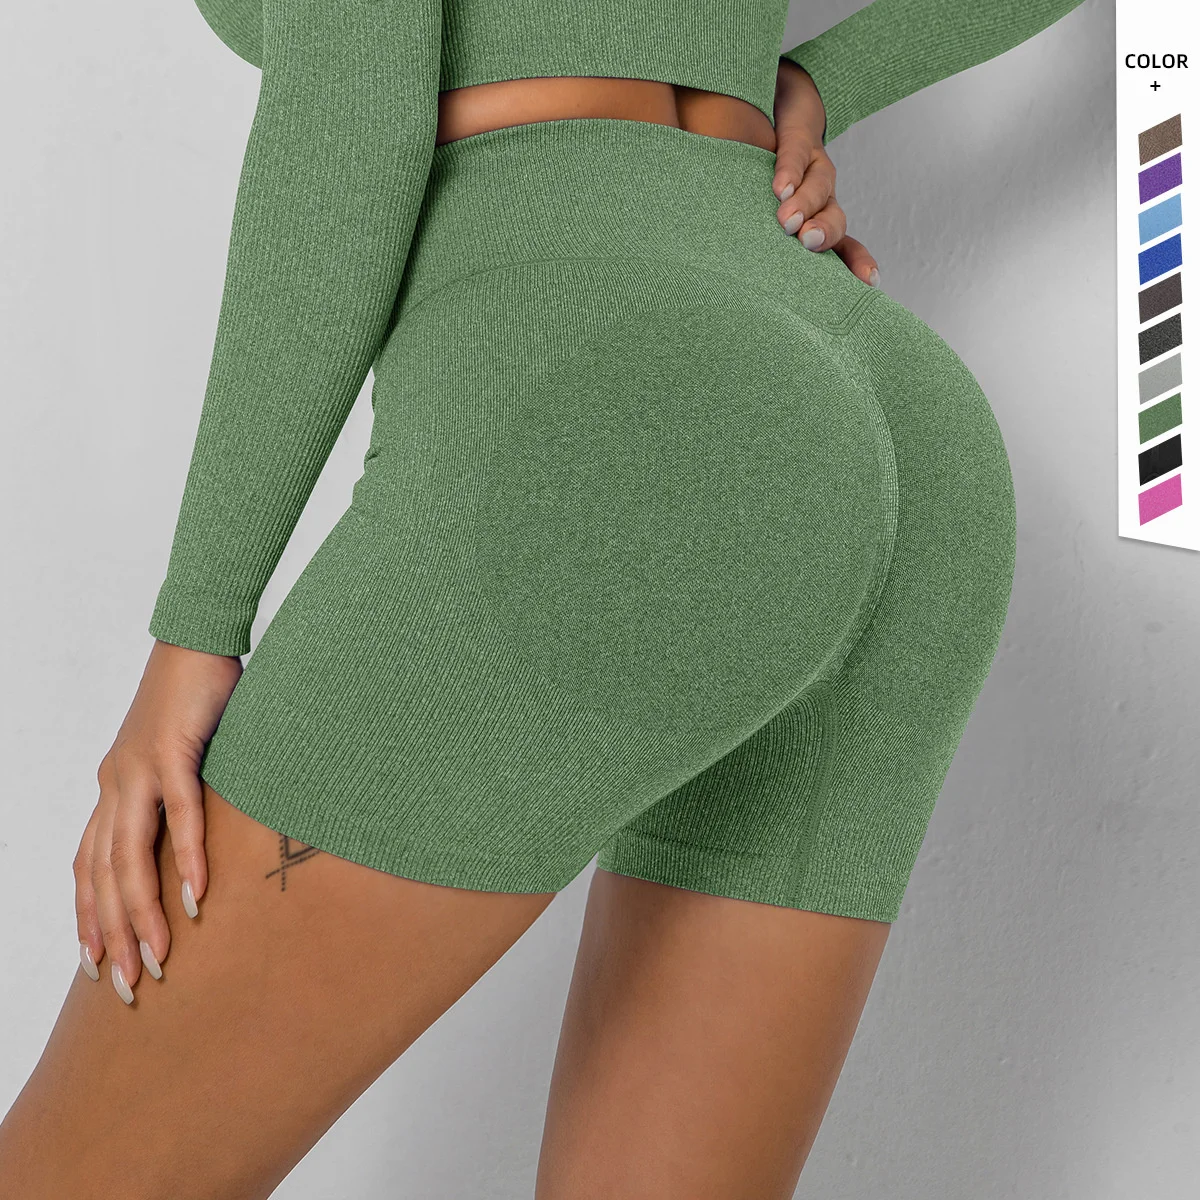 

New Thread Seamless Knitting Fitness Sports Shorts Yoga Suit High Waist Peach Cocked Hips Running Three-part Shorts Female